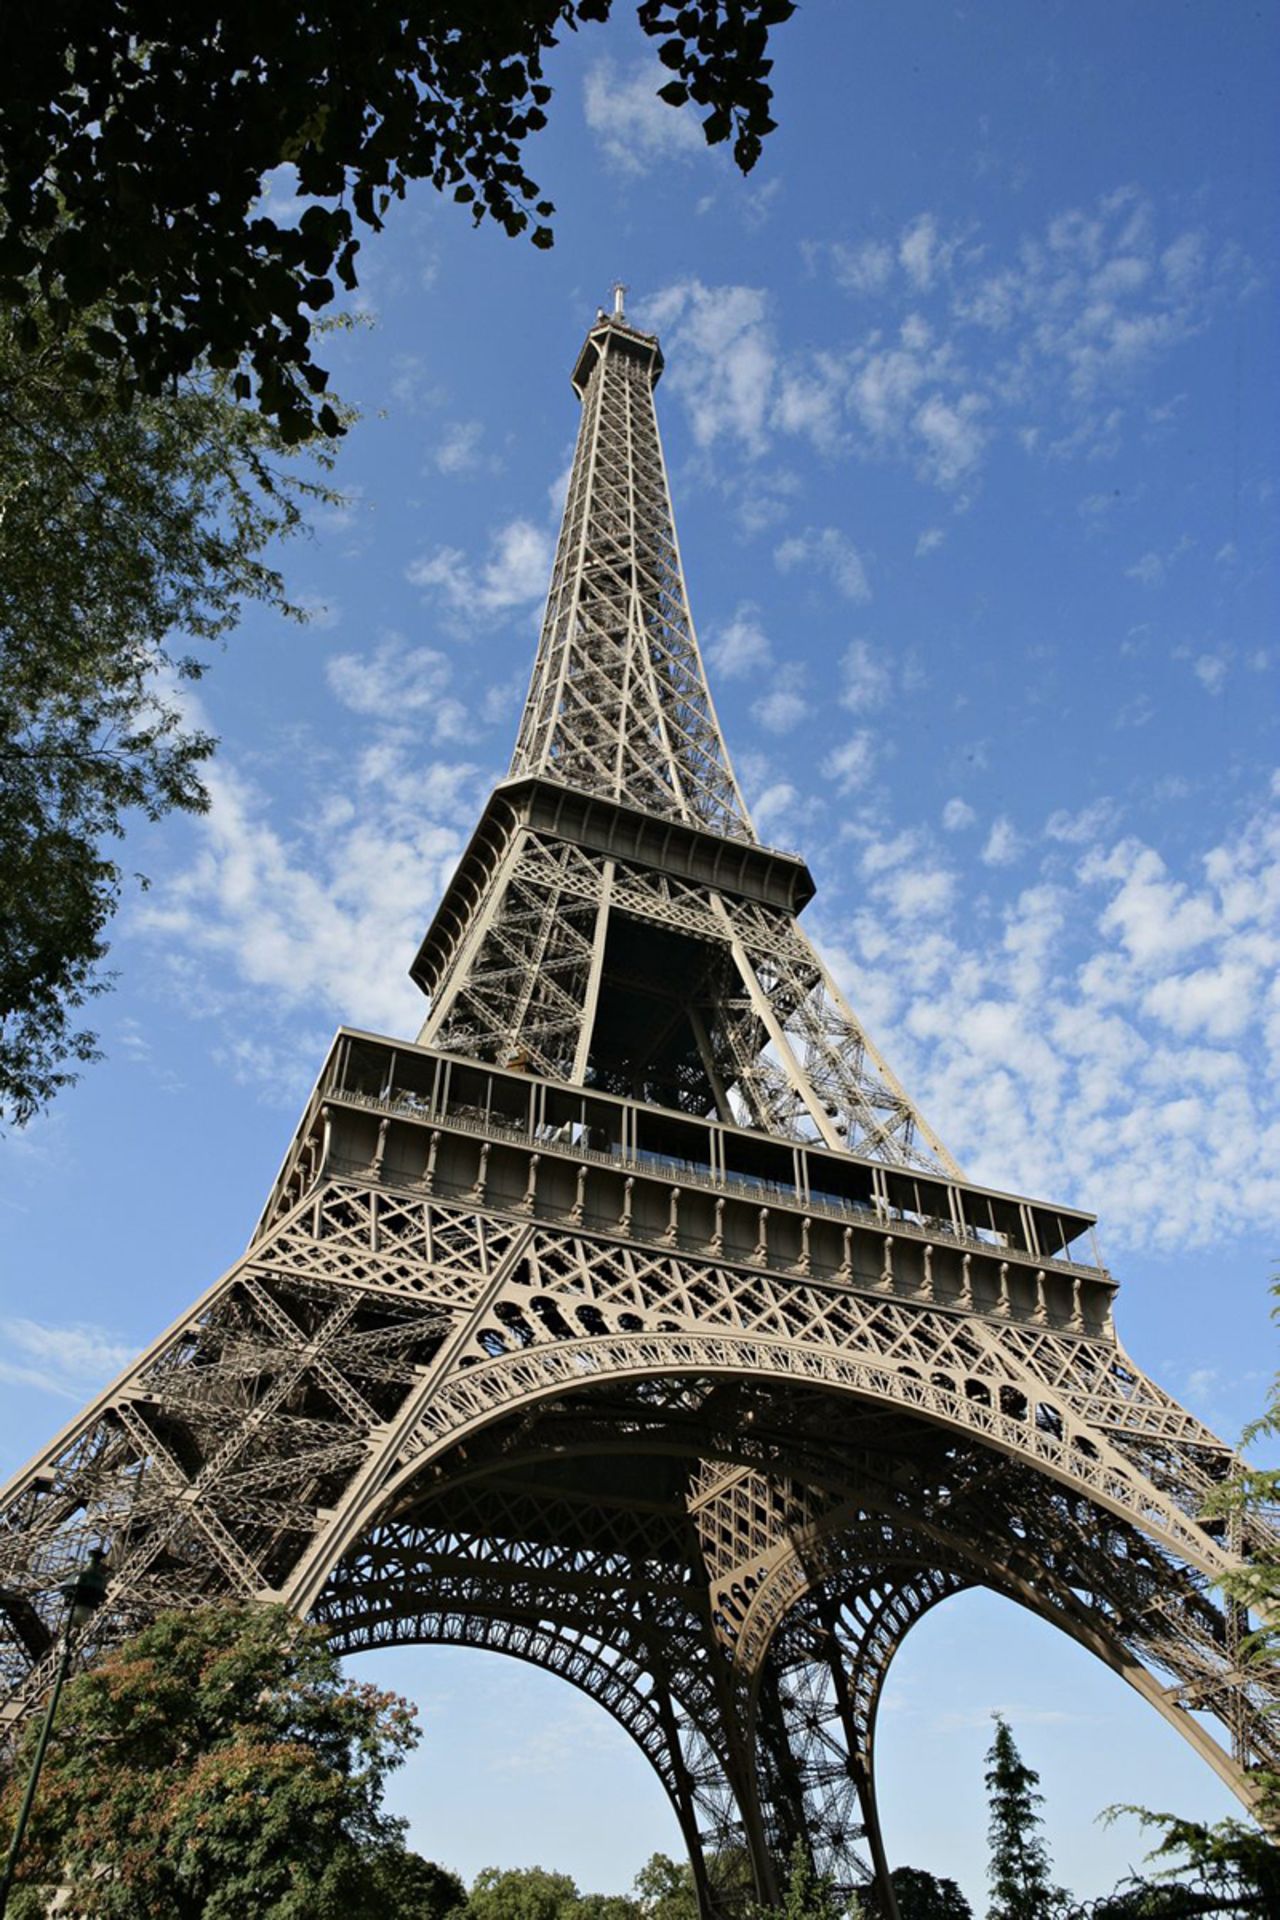 Temperature alters the height of the Eiffel Tower by up to 6 inches (15 centimeters) over the year.<br />The Eiffel Tower weighs 13,200 tons and was the first building to surpass the height of the Great Pyramid of Giza. It remained the world's tallest building until 1929, when New York's Chrysler Building took the top spot. Gustave Eiffel's initial building plans and calculations were so precise that no revisions had to be made during the construction process. <strong>Completion date:</strong> March 31, 1889.